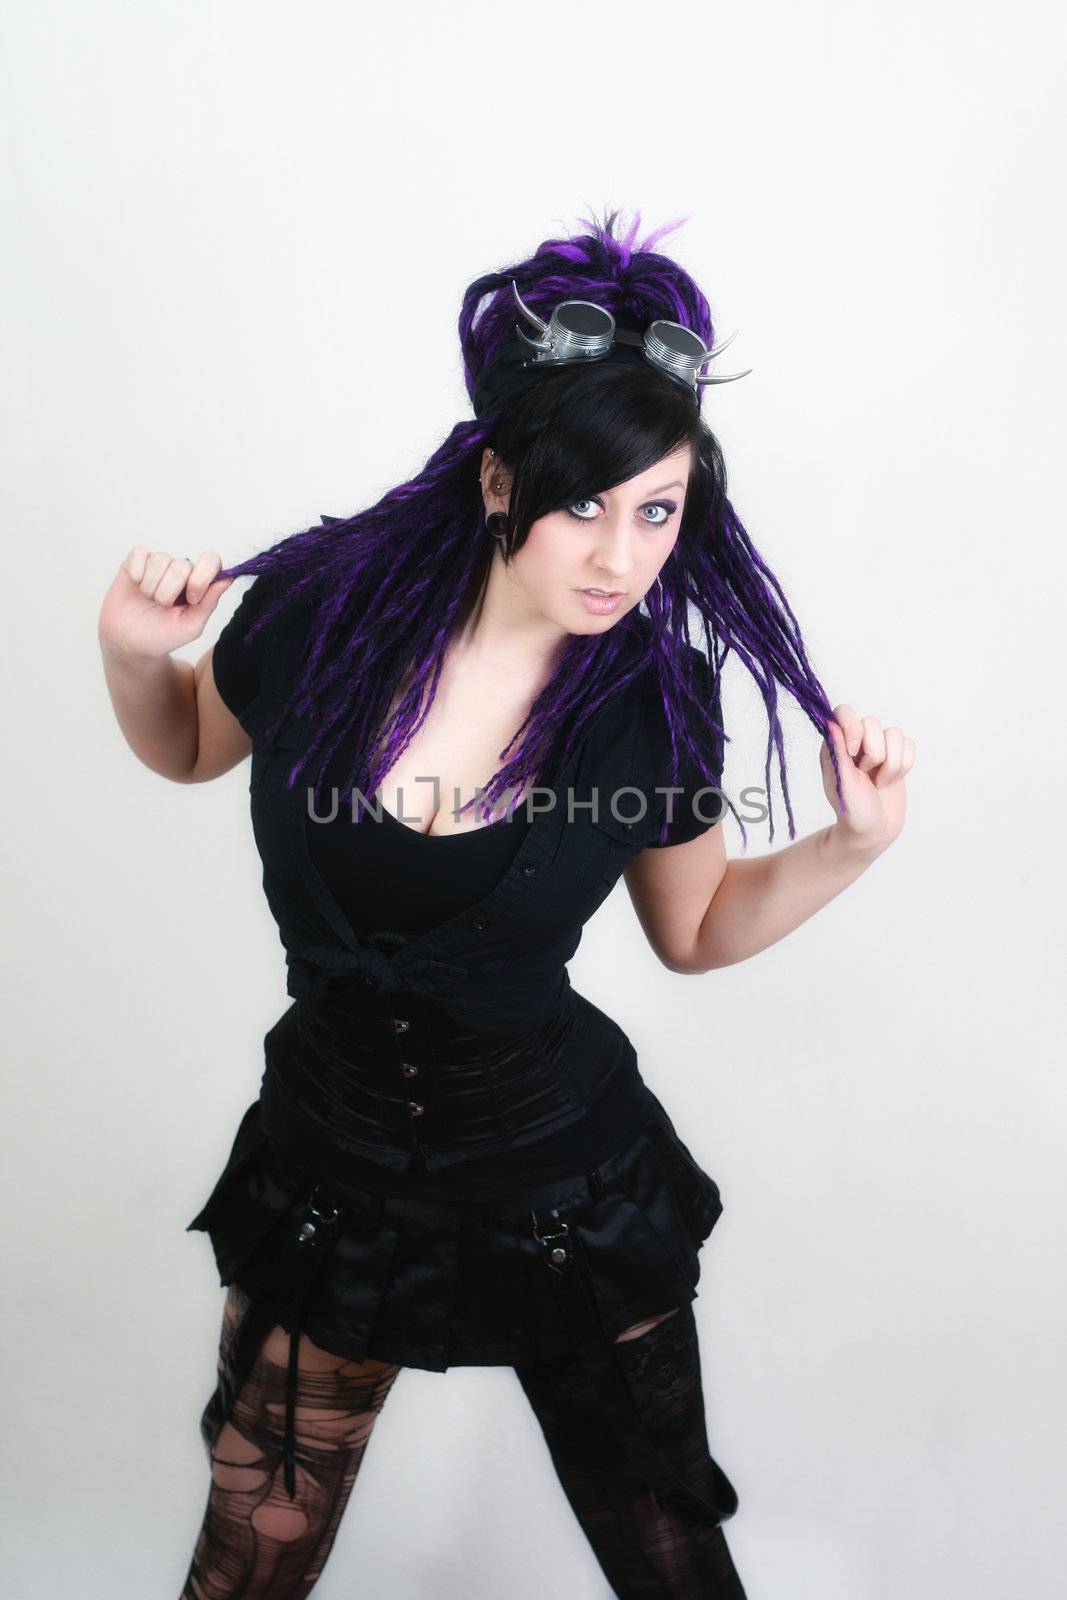 gothic girl with cyberlox and cyber goggle Studio Shot on White Background